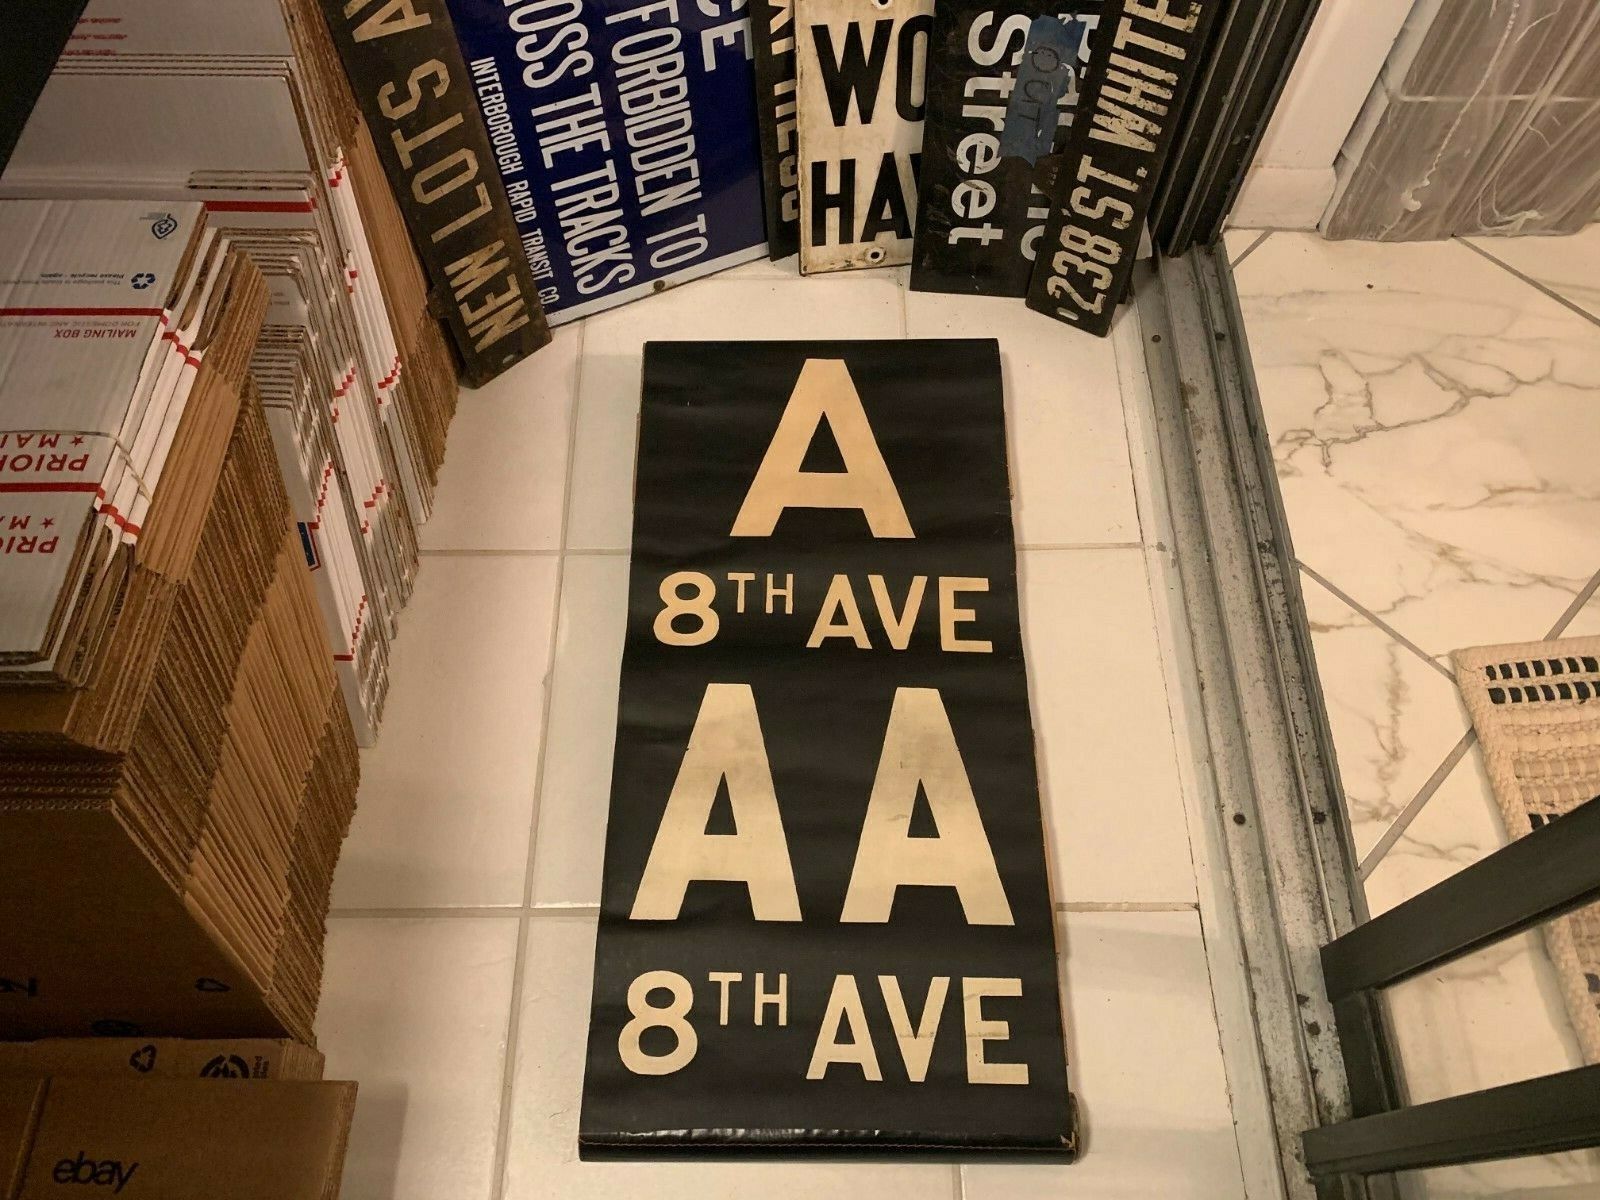 VINTAGE NY NYC R1/9 SUBWAY ROLL SIGN A AA 8 AVENUE TIMES SQUARE BLEECKER STREET